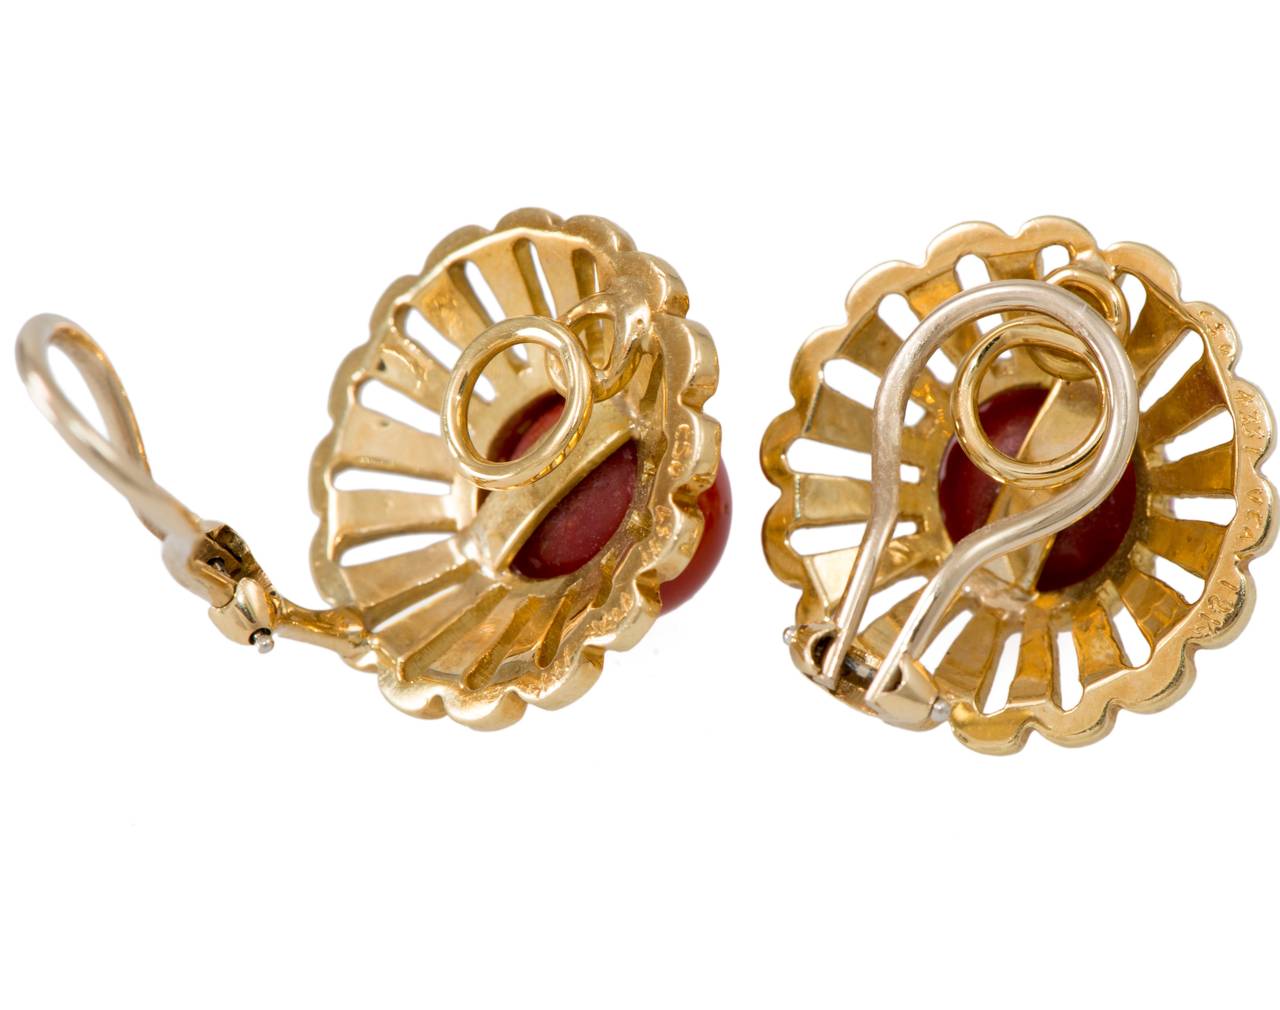 By Van Cleef & Arpels, these earrings,  in just the right color cabochon cut coral, are crafted in 18k gold with a sculpted floral surround. The perfect pair for summer day wear.

Stamped 18k, signed VCA and numbered.